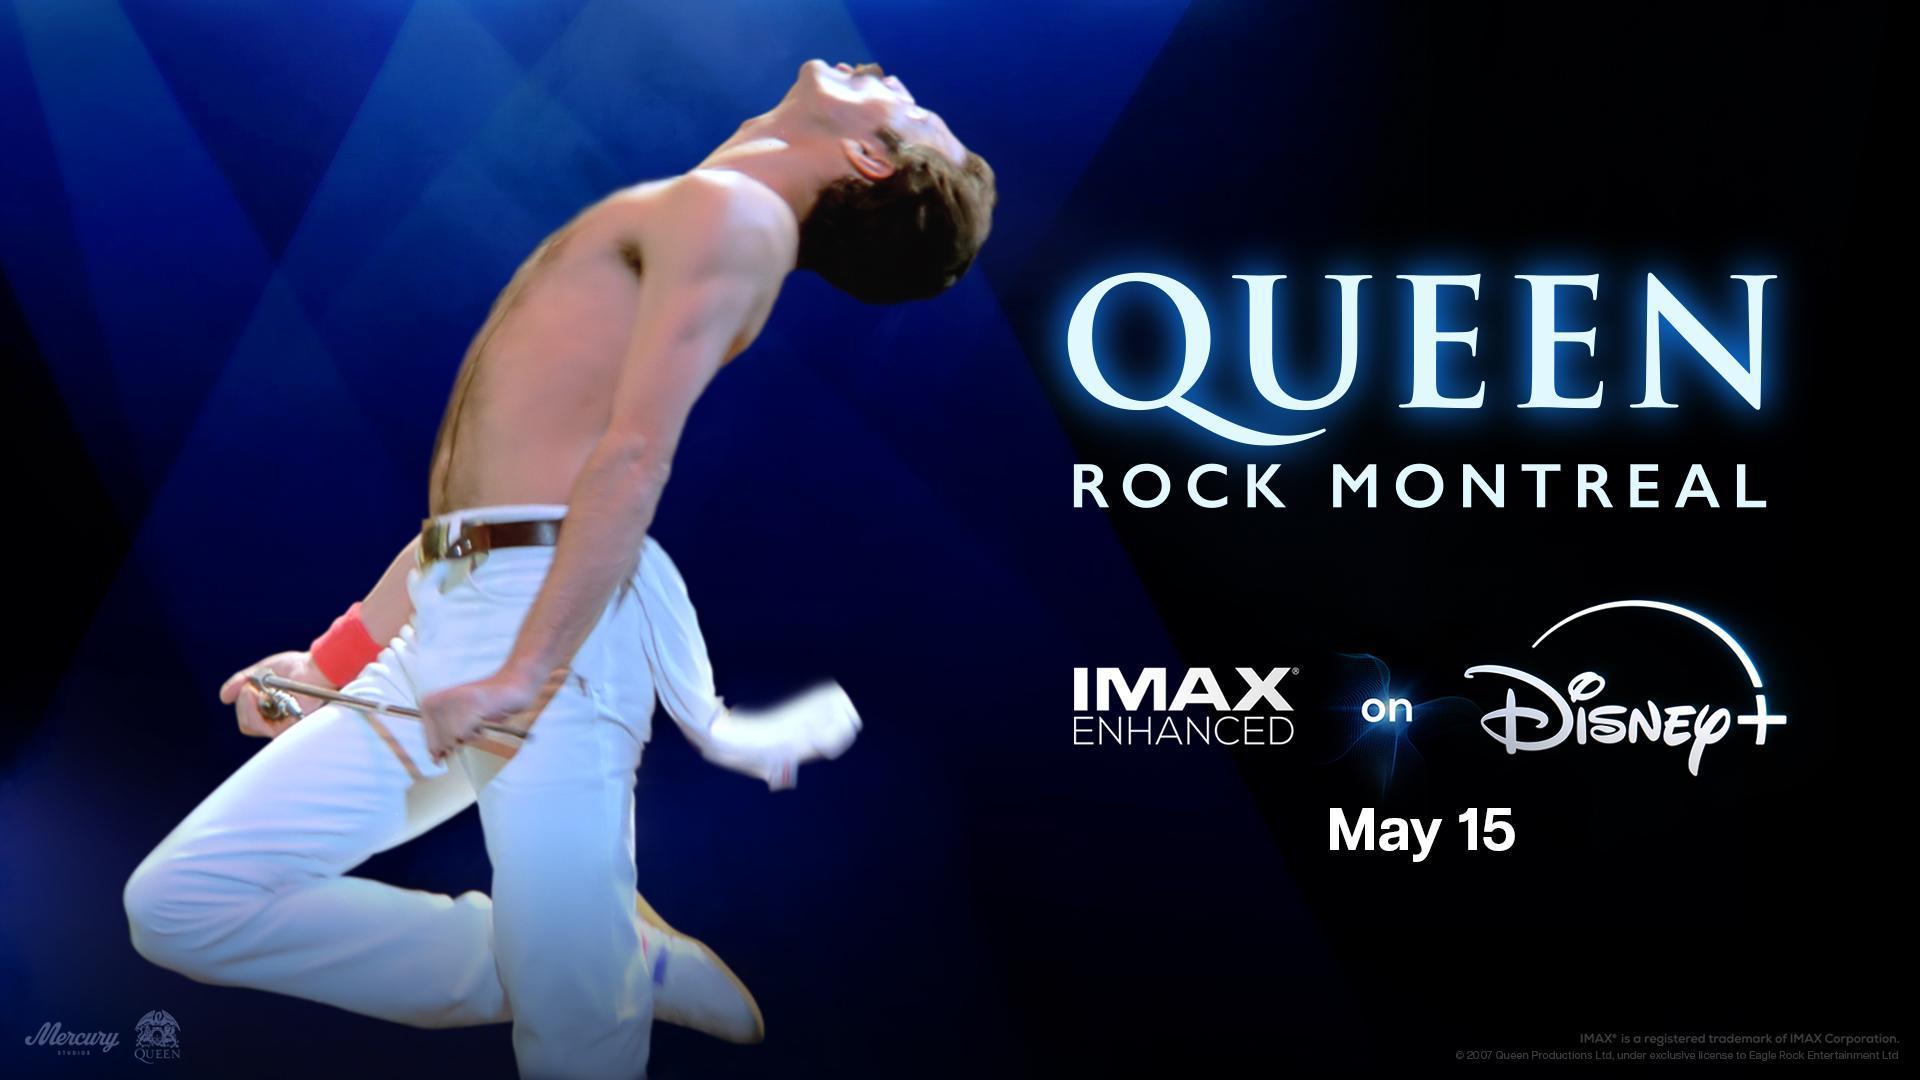 Disney+ Shares  “Queen Rock Montreal” Coming To Disney+ On May 15, The First Concert Film Available With Imax Enhanced Sound By DTS